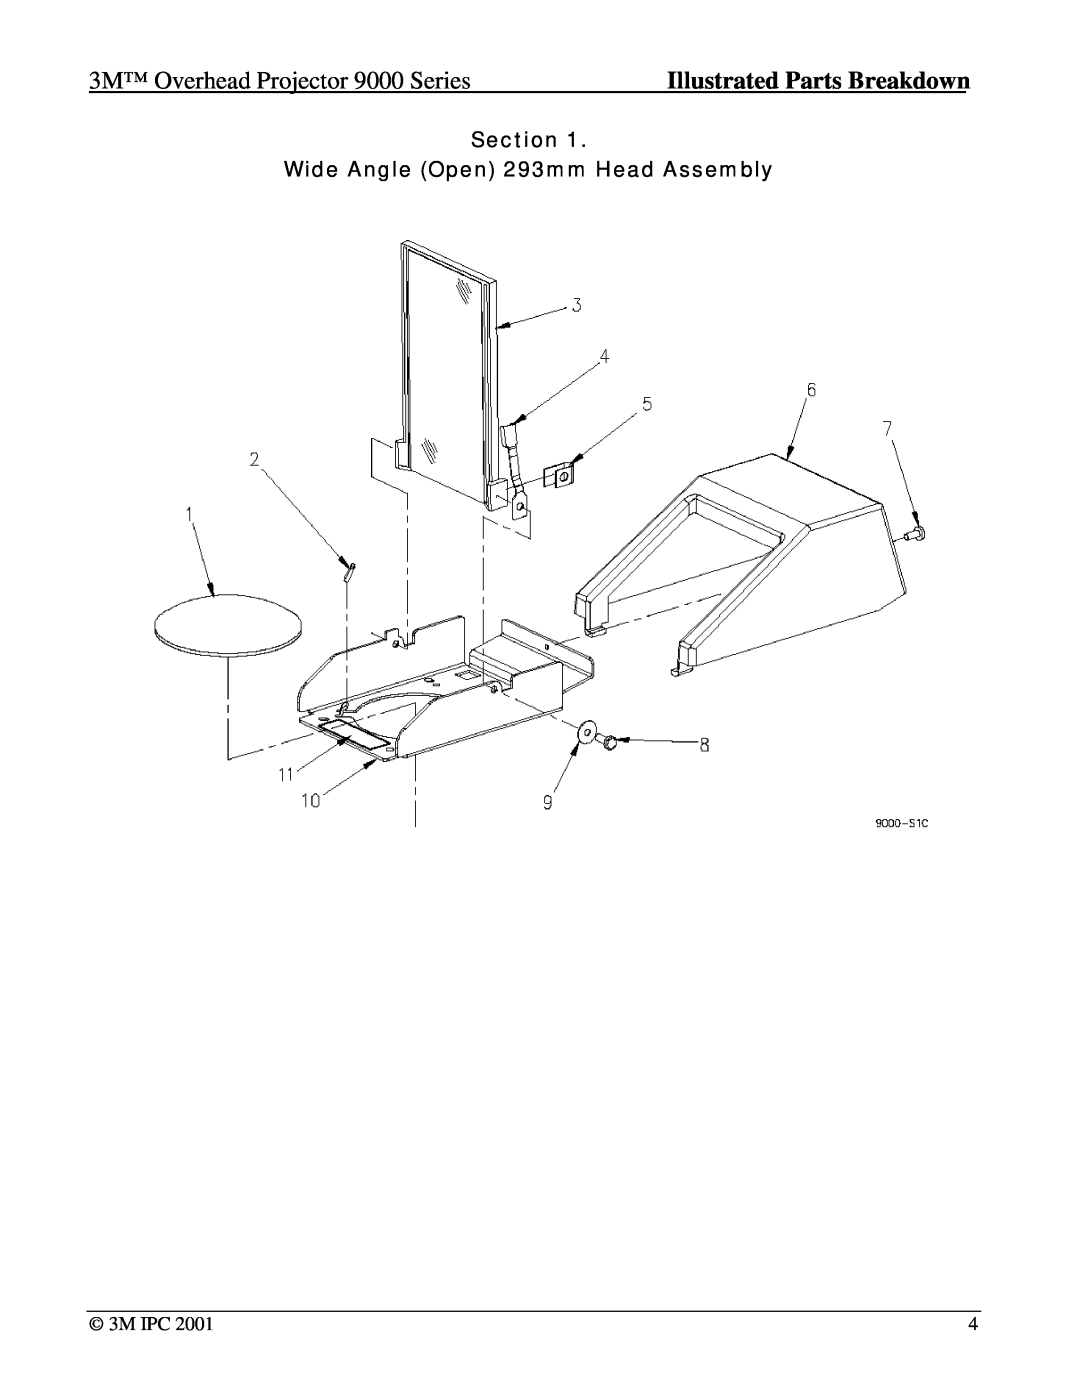 Xerox 9070 Section Wide Angle Open 293mm Head Assembly, 3M Overhead Projector 9000 Series, Illustrated Parts Breakdown 